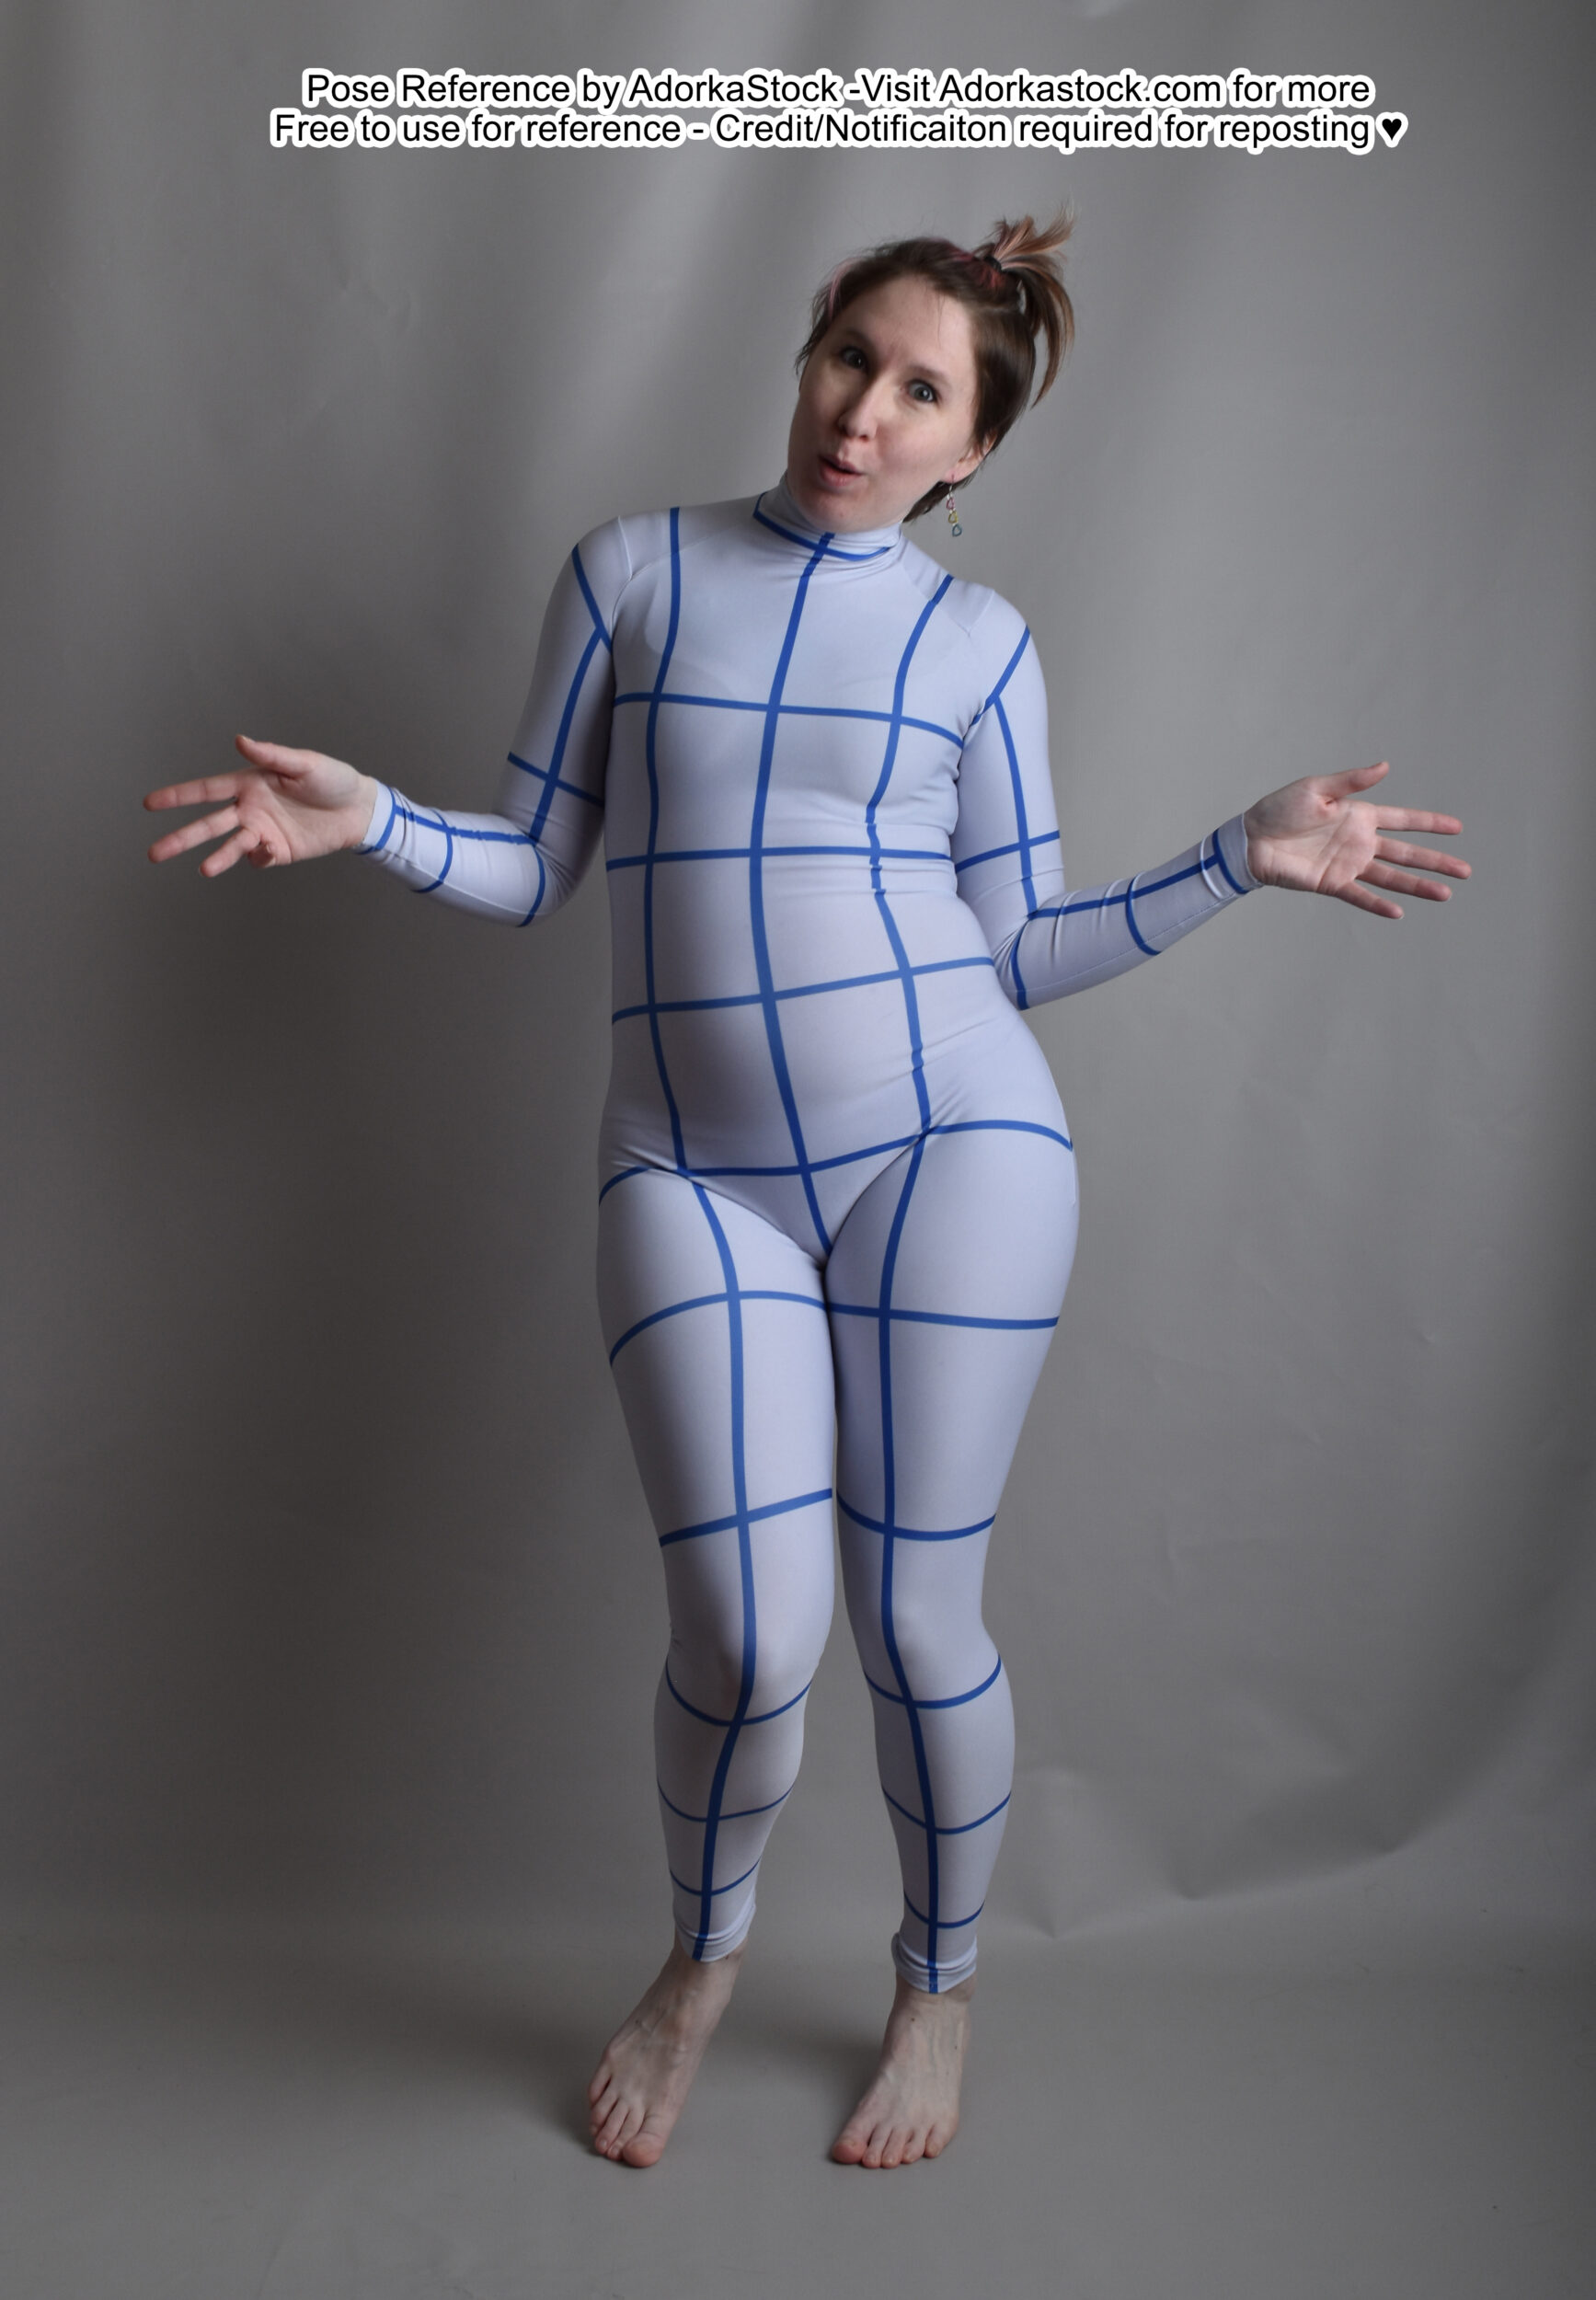 thin, white, female pose reference model in grid suit pose reference with arms out in a open hand shrug with weight shifted a bit onto one foot